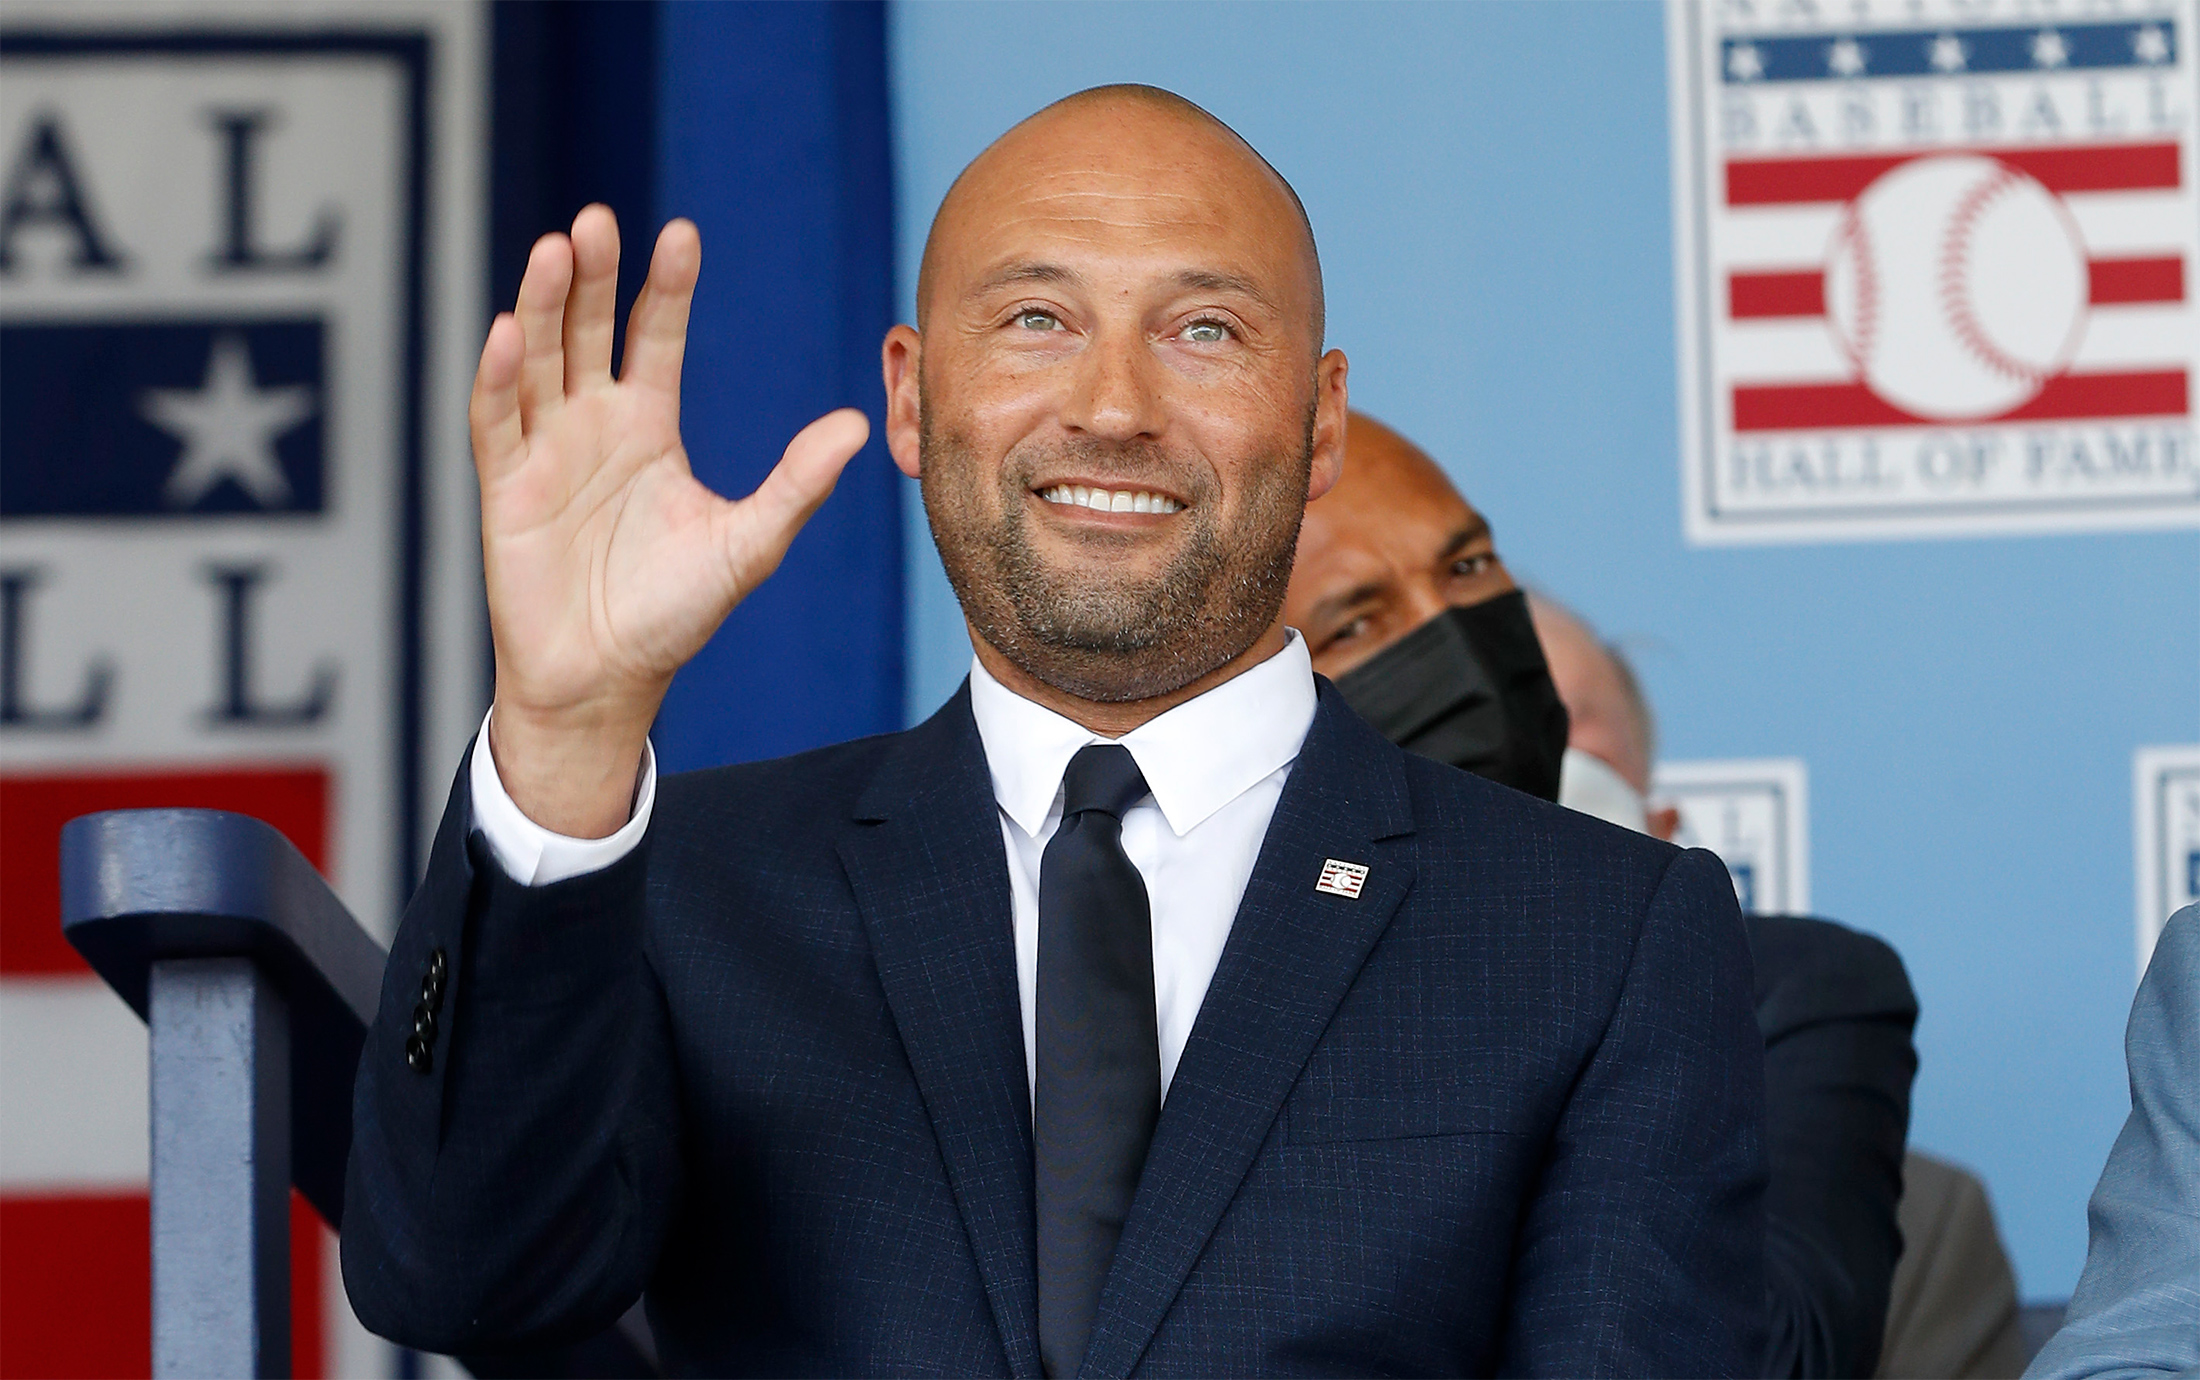 Derek Jeter will reportedly be paid millions in bonuses for making